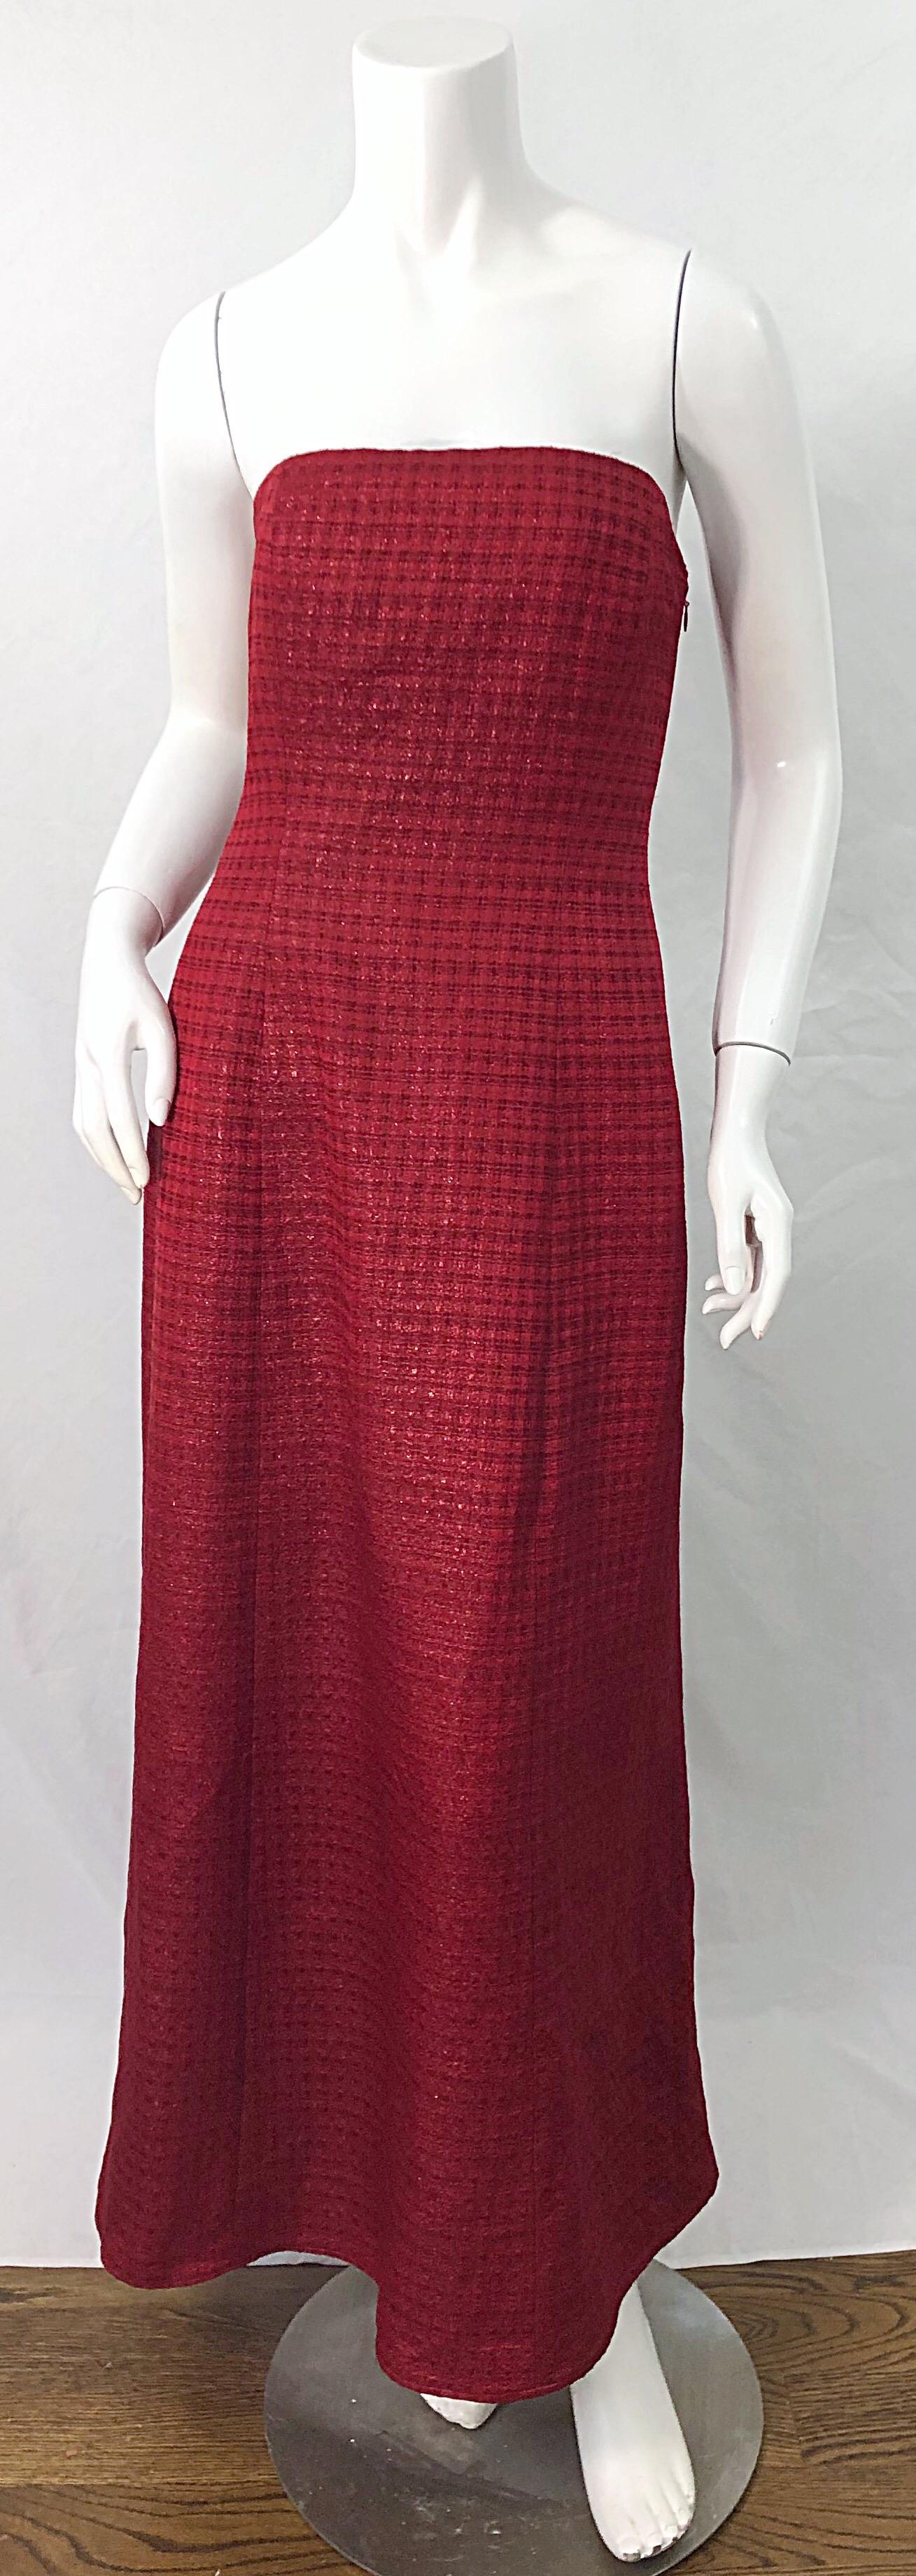 Stunning 1990s LOUIS FERAUD cranberry red silk and wool strapless evening gown ! Features a warm cranberry color with a slightly iridescent woven checkered print. Fully lined. Hidden zipper up the side with hook-and-eye closure. Interior boned